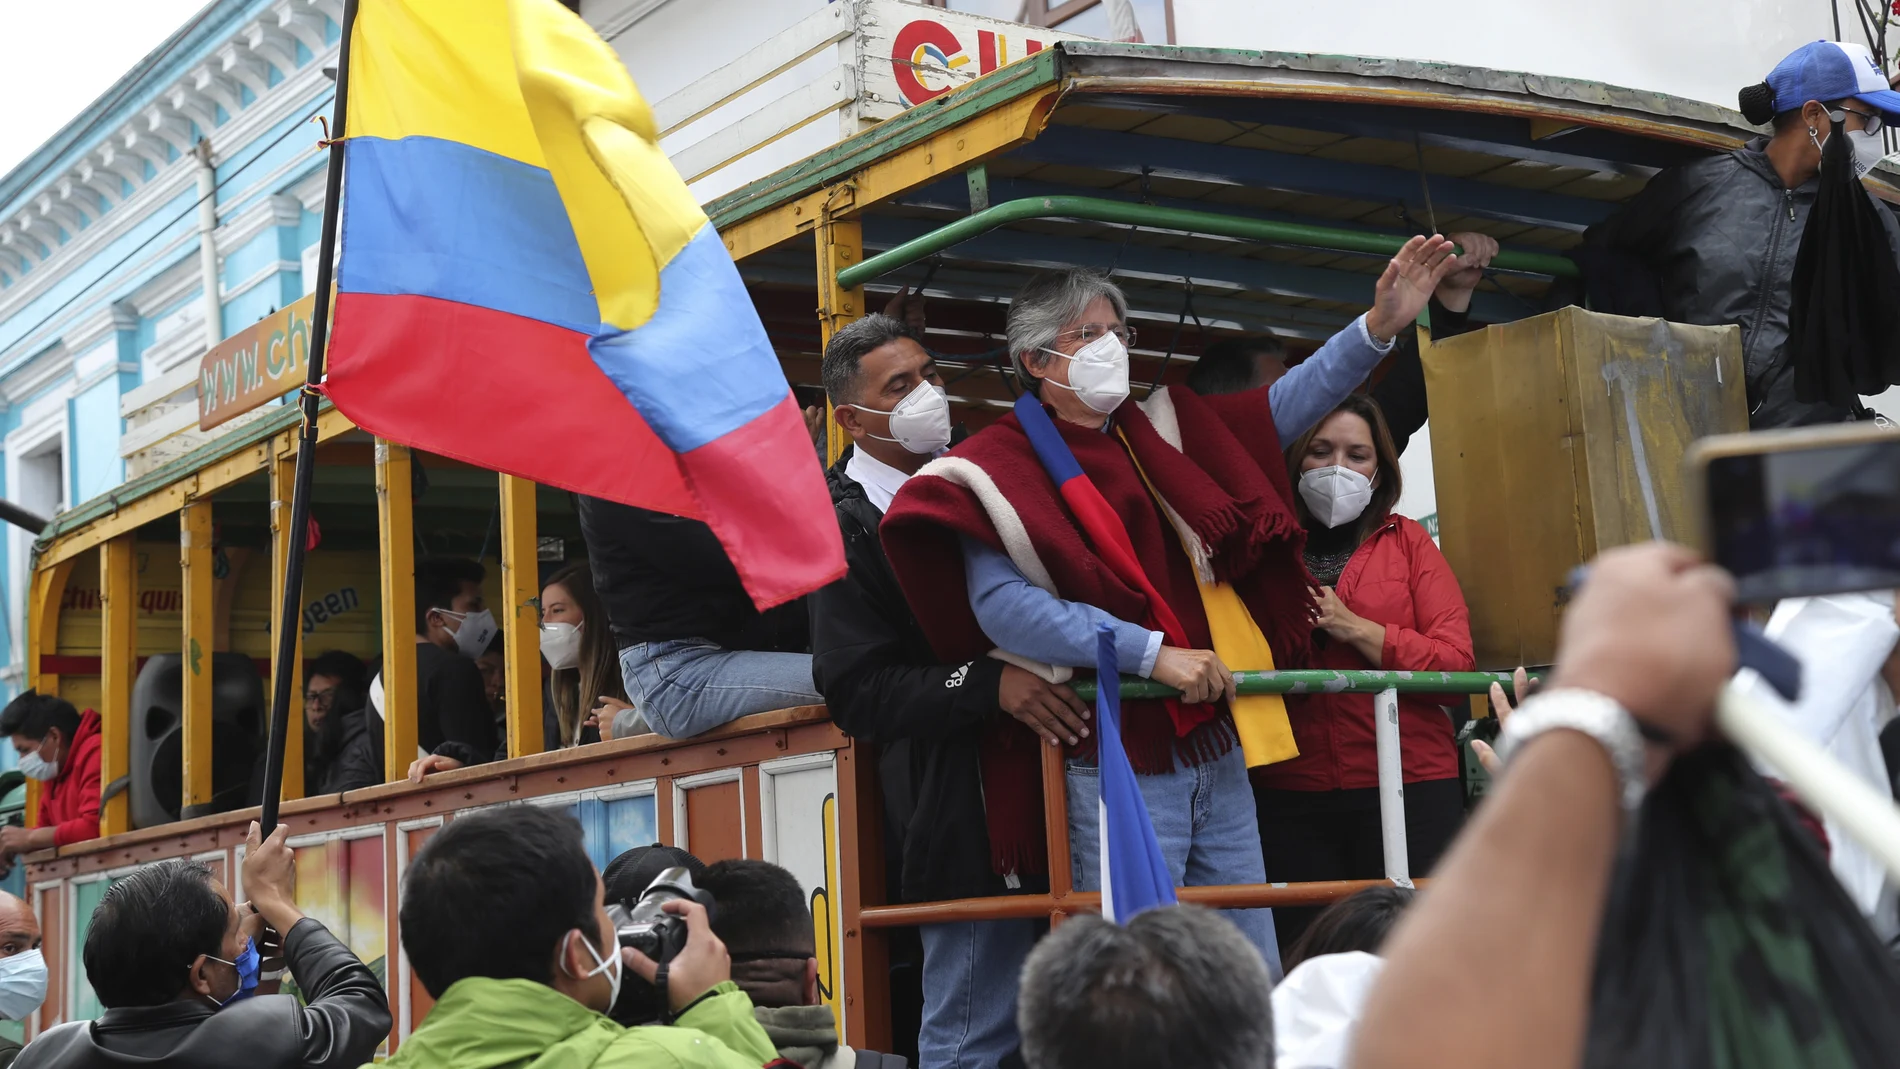 Former banker Guillermo Lasso, presidential candidate for the CREO political party, and his wife Maria de Lourdes Alcivar greet supporters from a "Chiva," an old truck converted to carry tourists, during a rally ahead of Ecuador's runoff presidential election in Quito, Ecuador, Wednesday, April 7, 2021. (AP Photo/Dolores Ochoa)